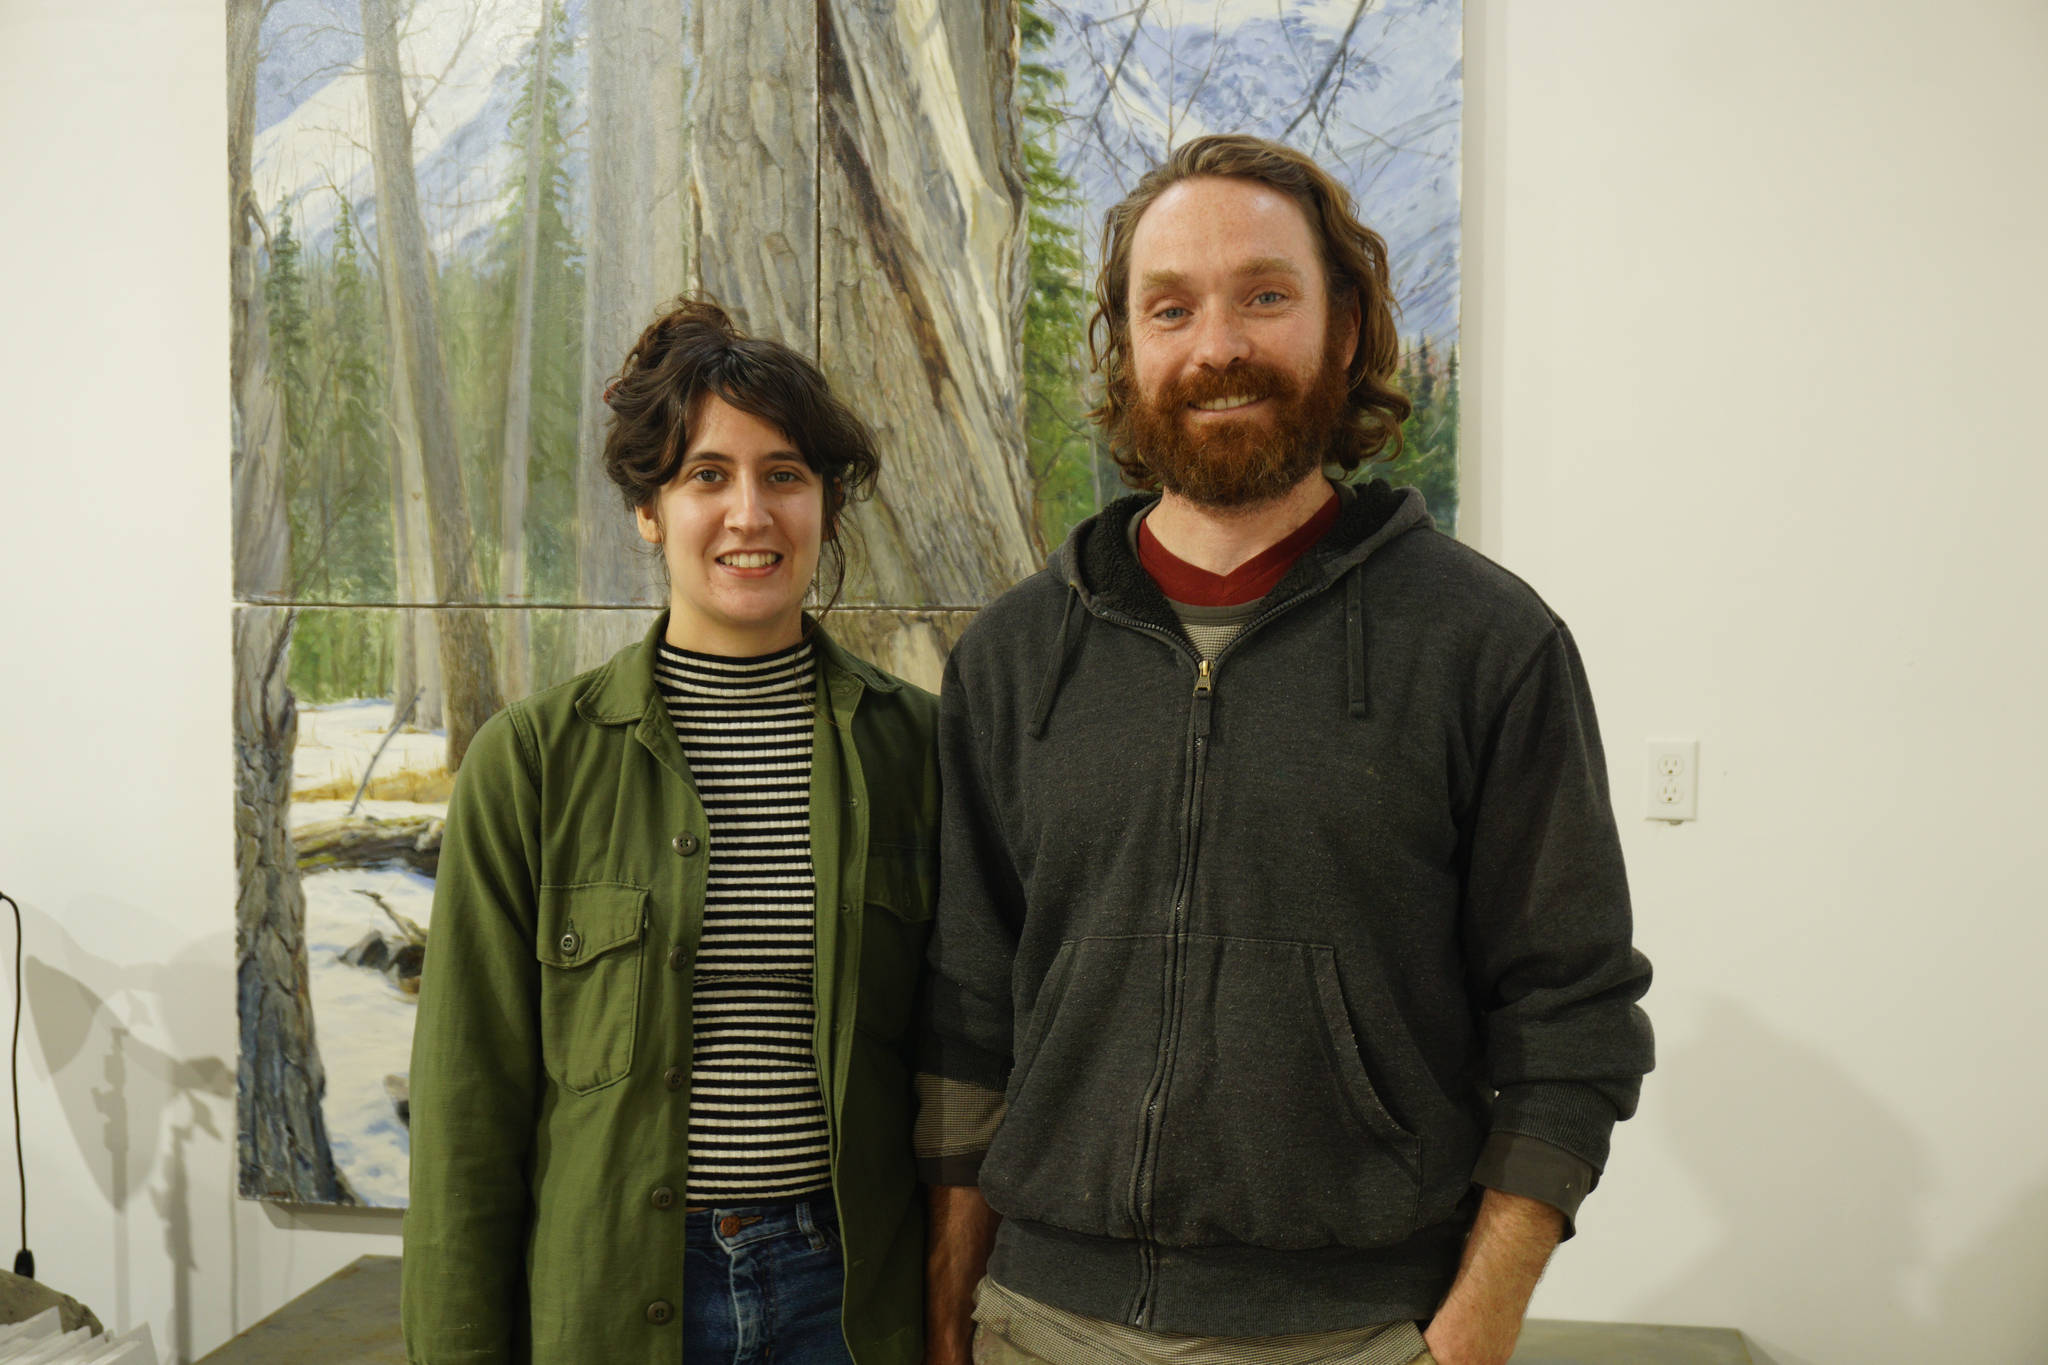 Elissa and David Pettibone pose on Tuesday, Oct. 16, 2018, by one of David Pettibone’s paintings at The Shop, an art space the Pettibones started in August 2018 in Kachemak City, Alaska. (Photo by Michael Armstrong/Homer News)